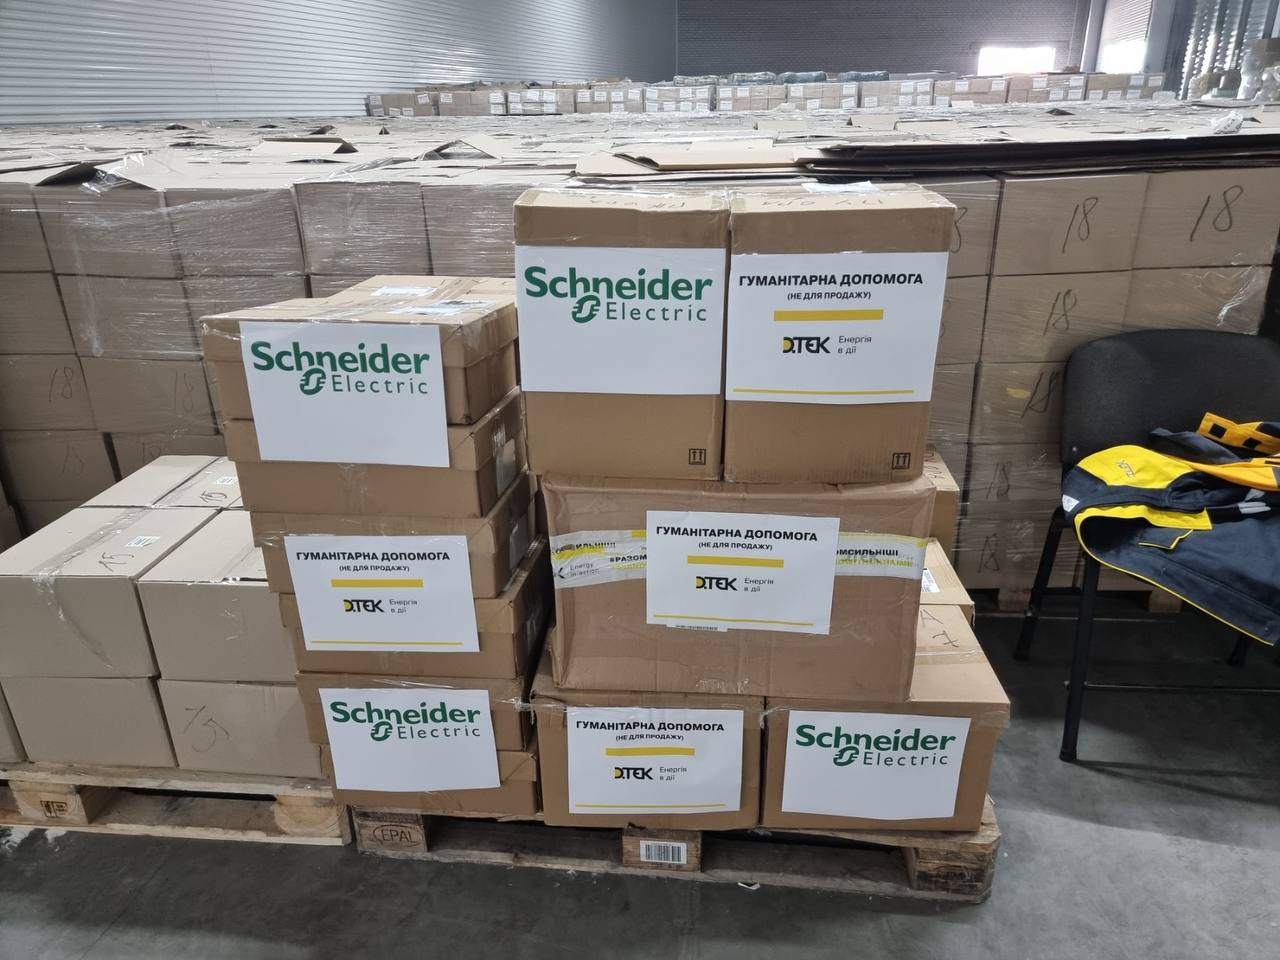 Second batch of humanitarian aid from Schneider Electric and DTEK arrives in Eastern Ukraine. Picture 2